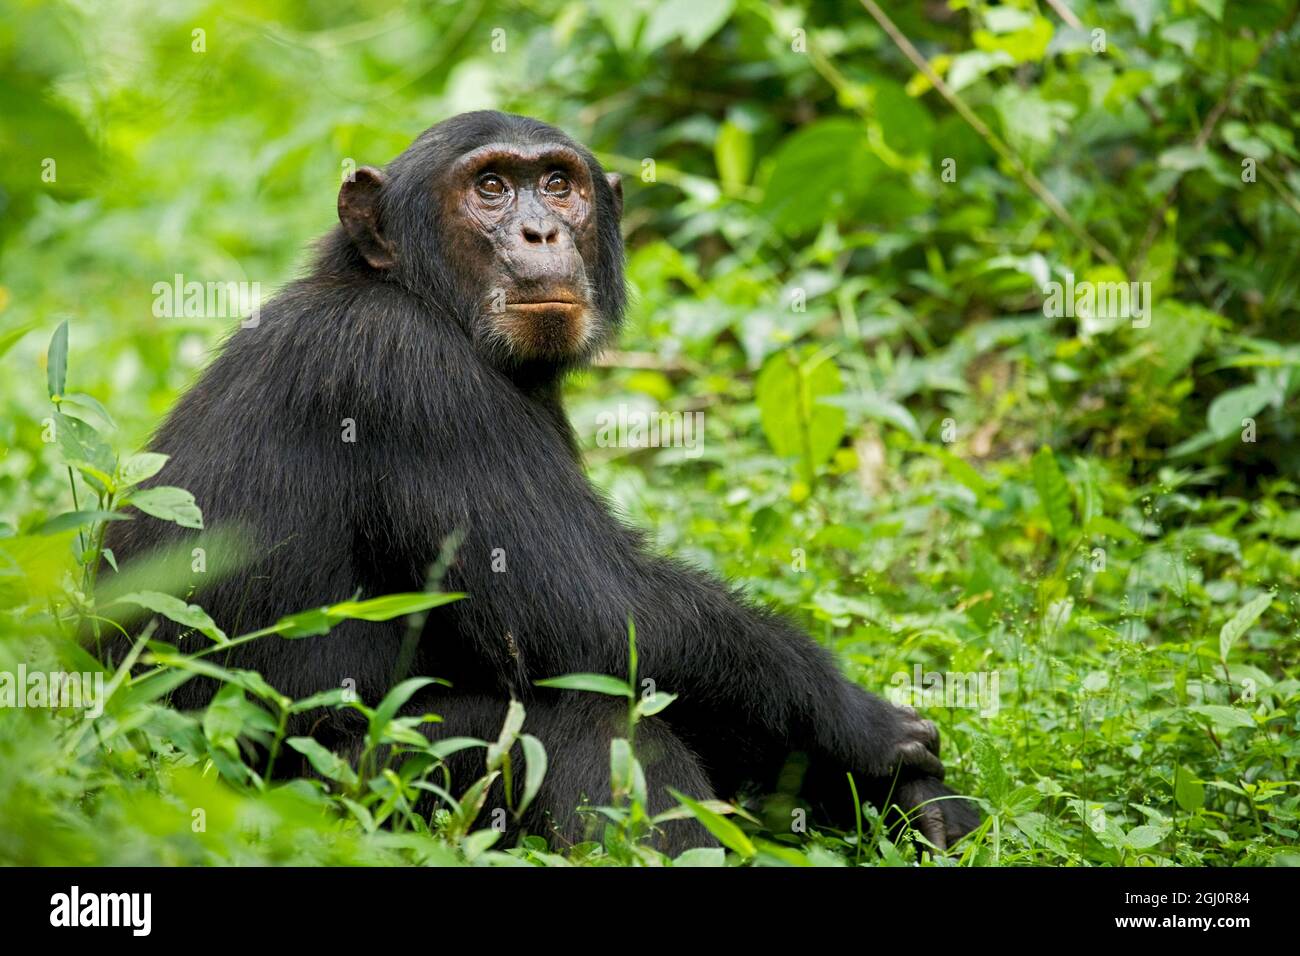 Africa, Uganda, Kibale National Park, Ngogo Chimpanzee Project.  A young adult chimpanzee relaxes on a path waiting for others in his group. Stock Photo